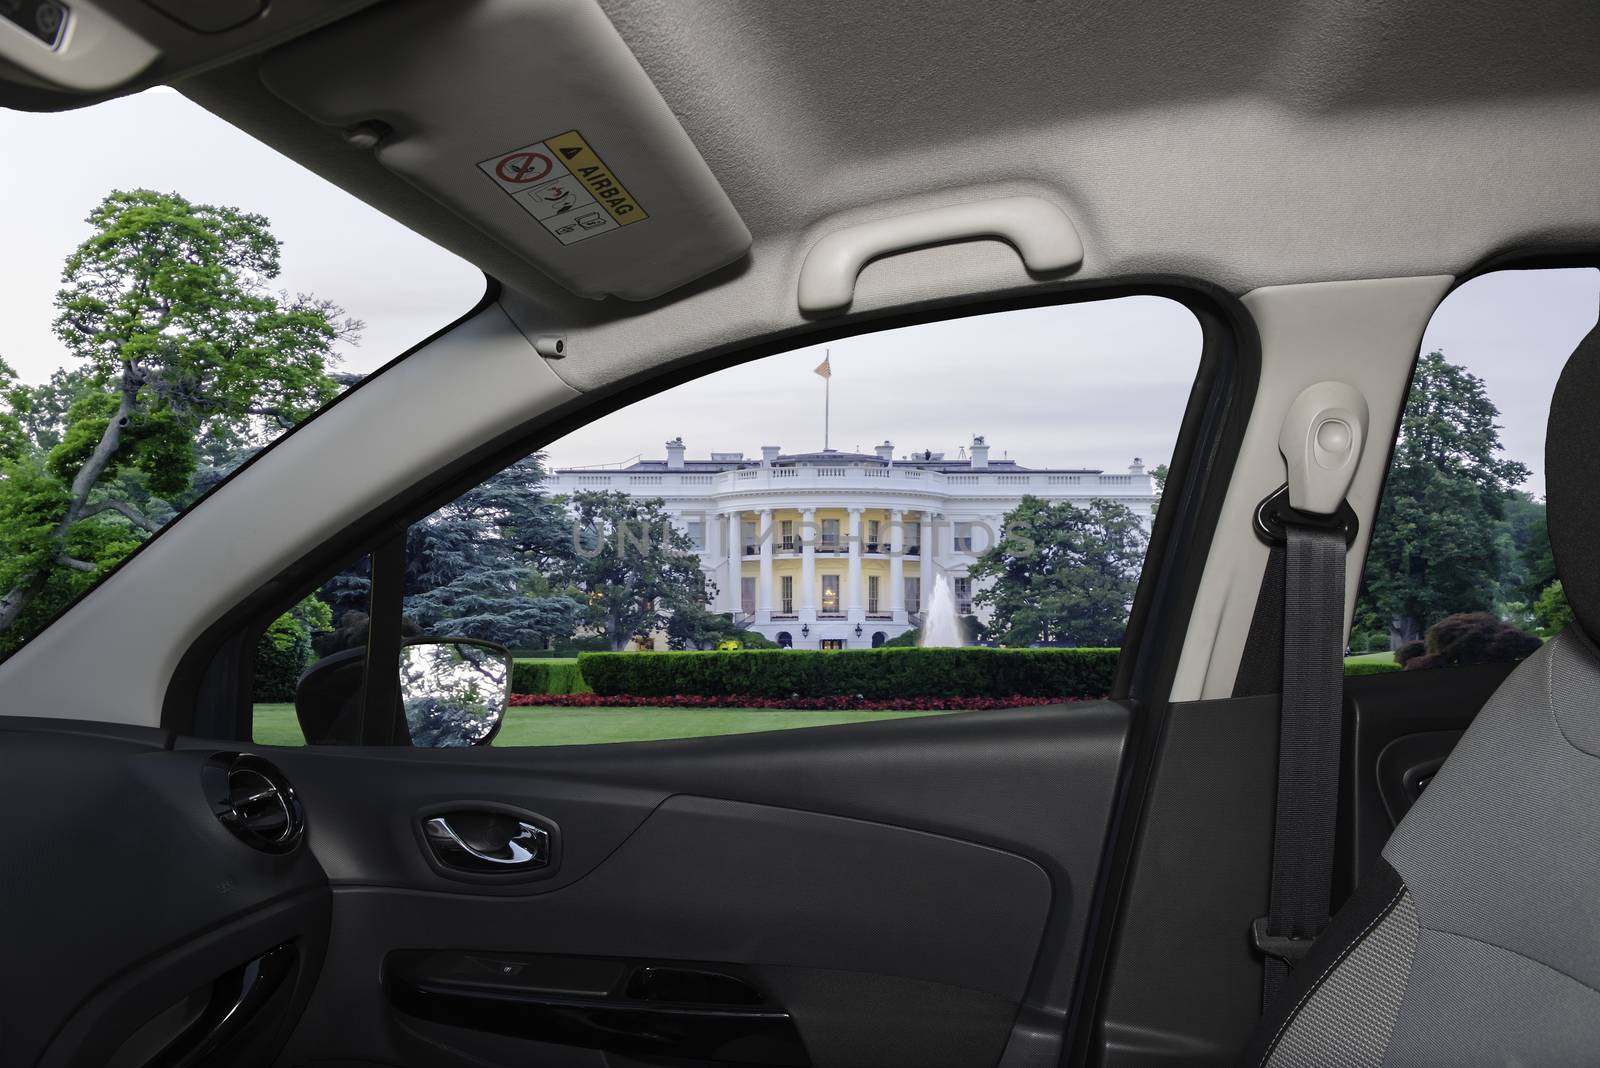 Looking through a car window with view of the White House, Washington DC, USA